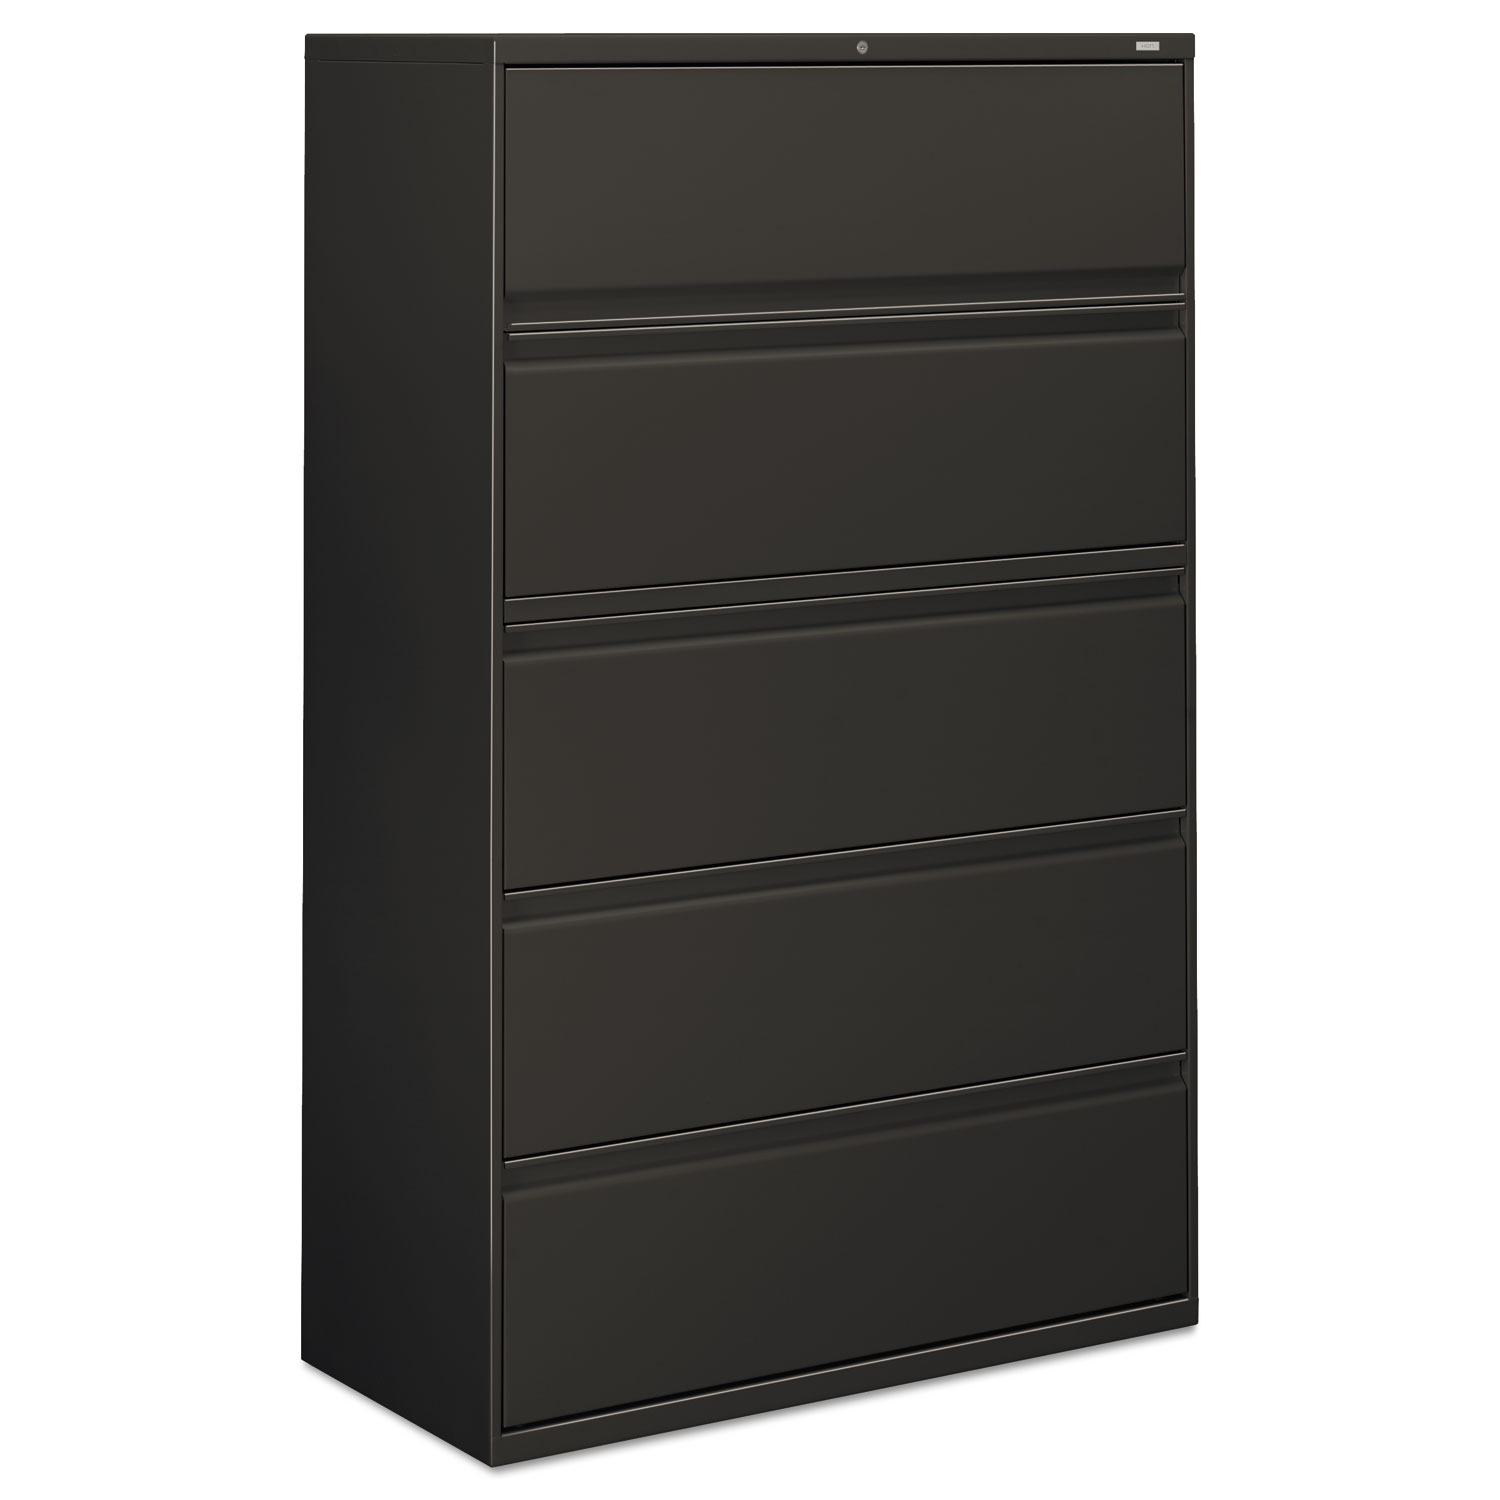 HON 800 Series Five-Drawer Lateral File, Roll-Out/Posting Shelves, 42 x 67, Charcoal